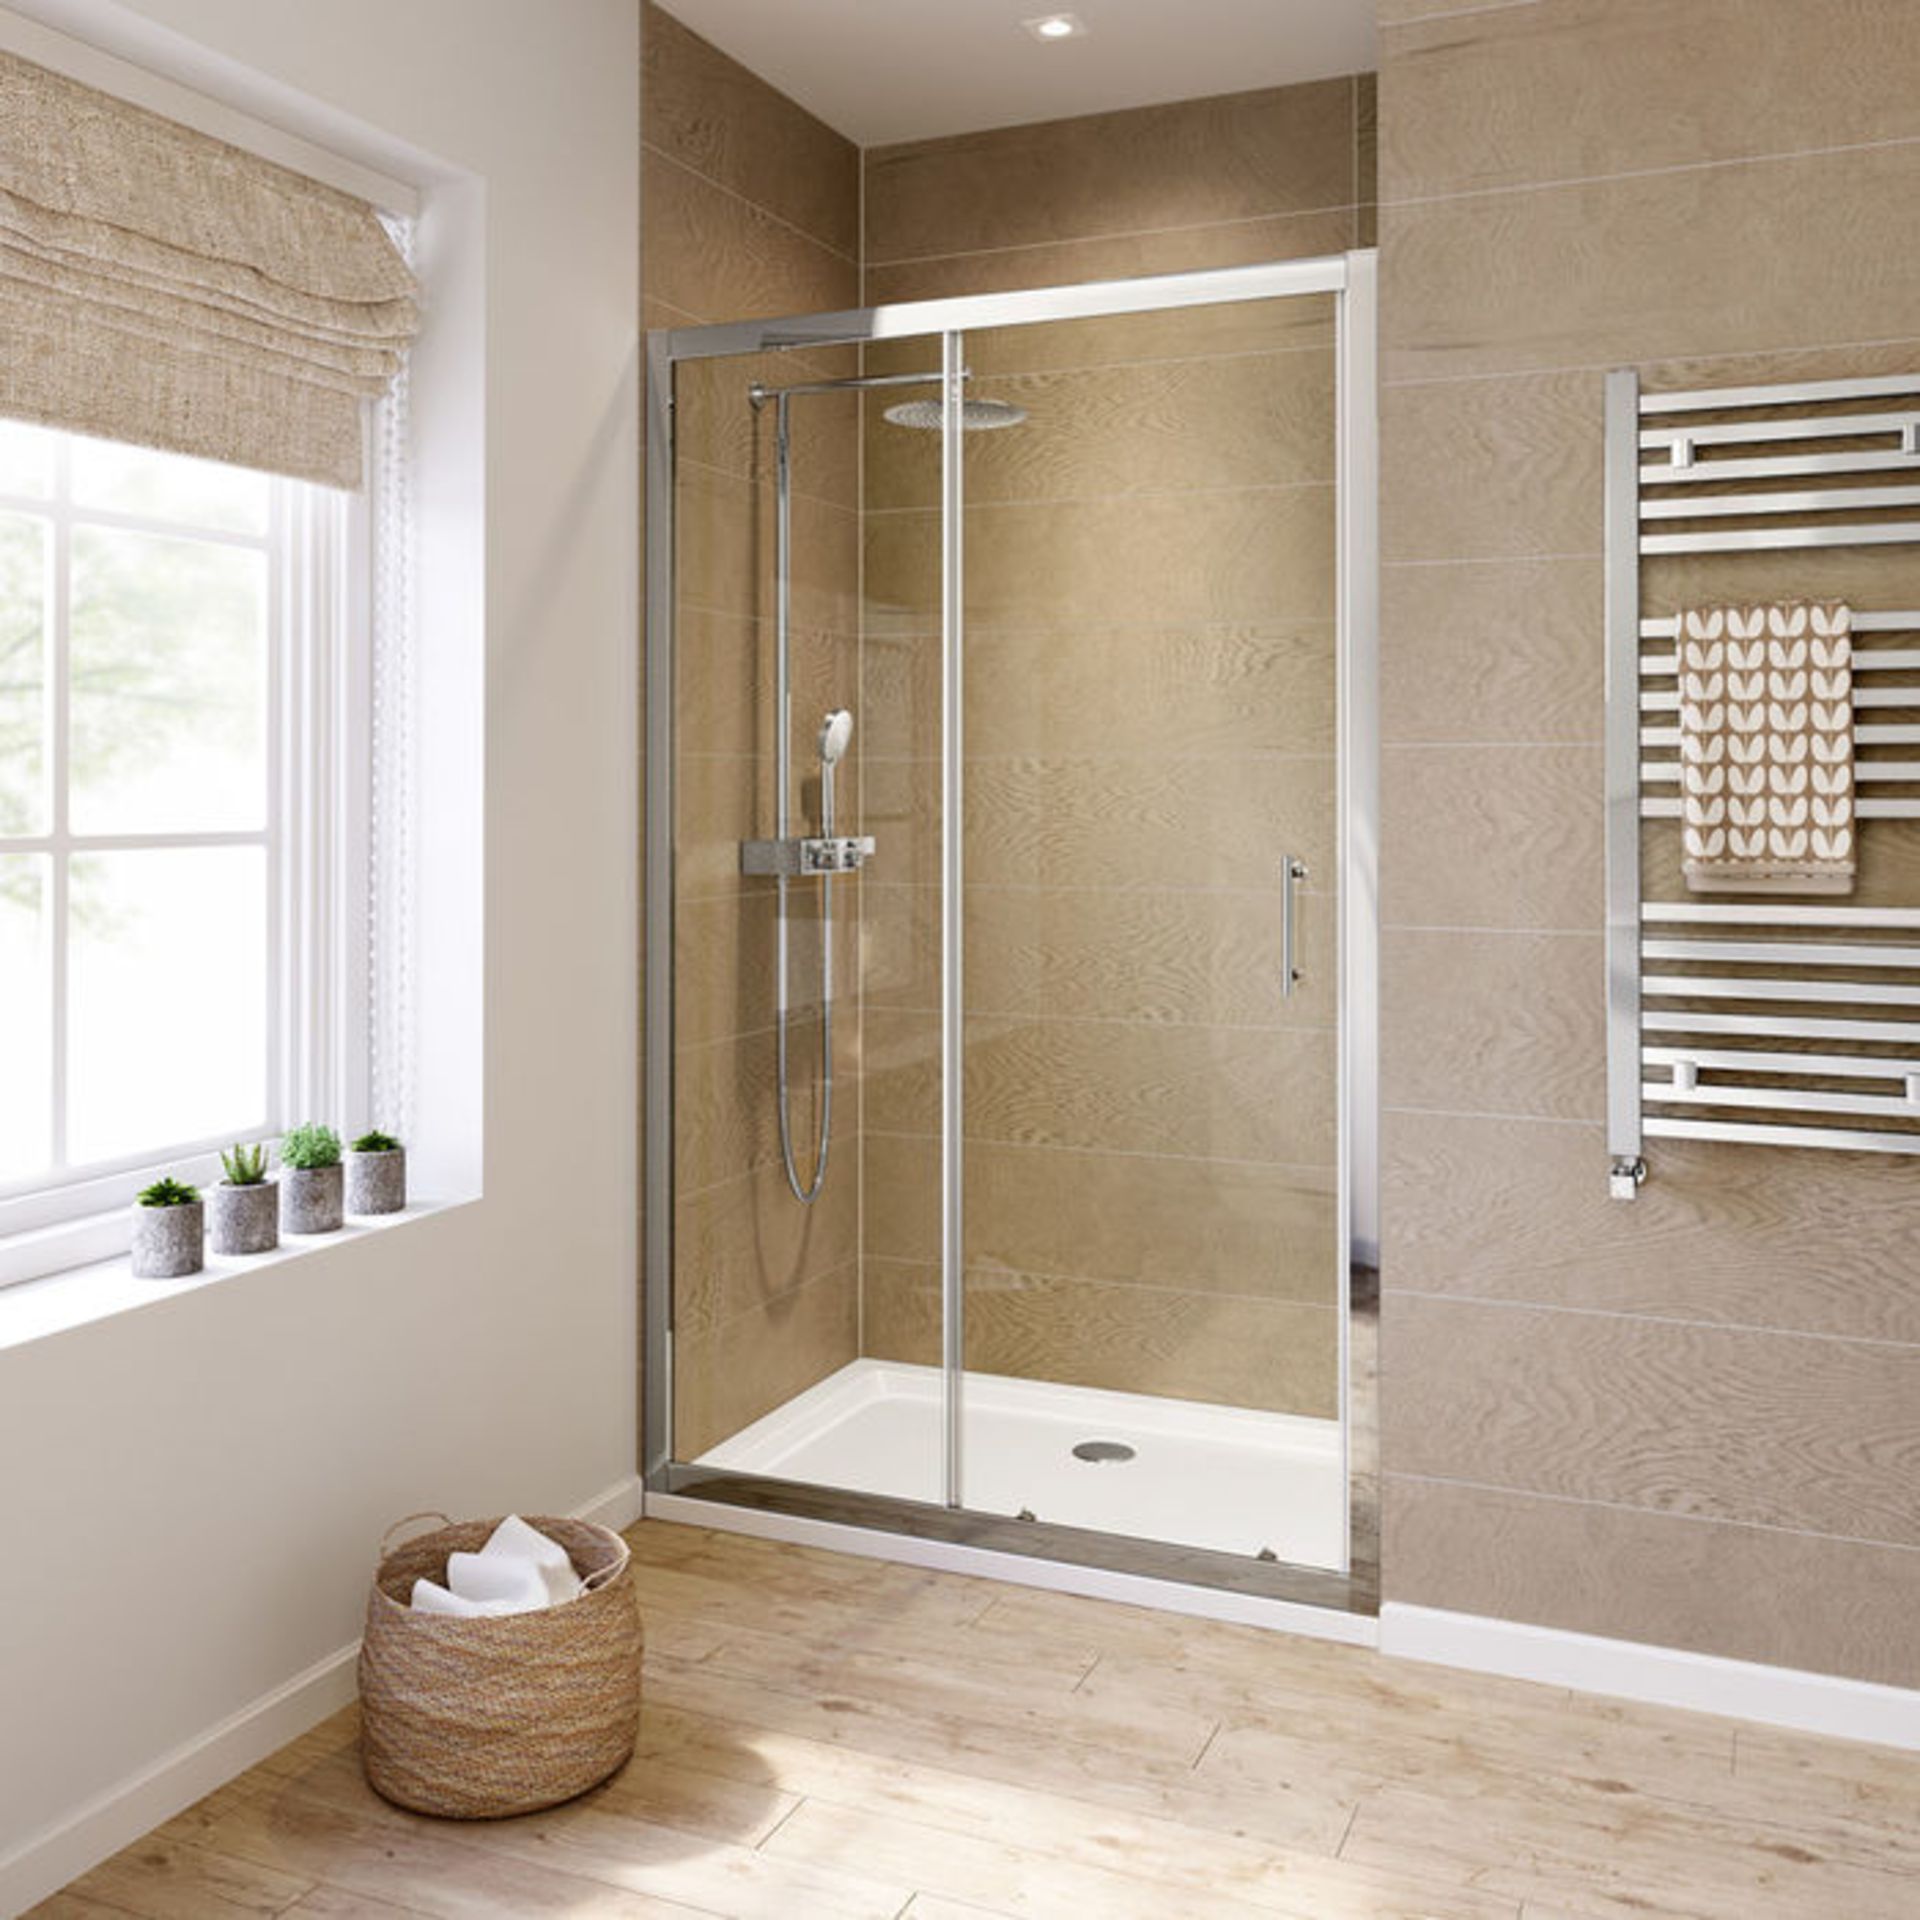 (HS26) 1200mm - 6mm - Elements Sliding Shower Door. RRP £299.99. 6mm Safety Glass Fully waterproof - Image 2 of 4